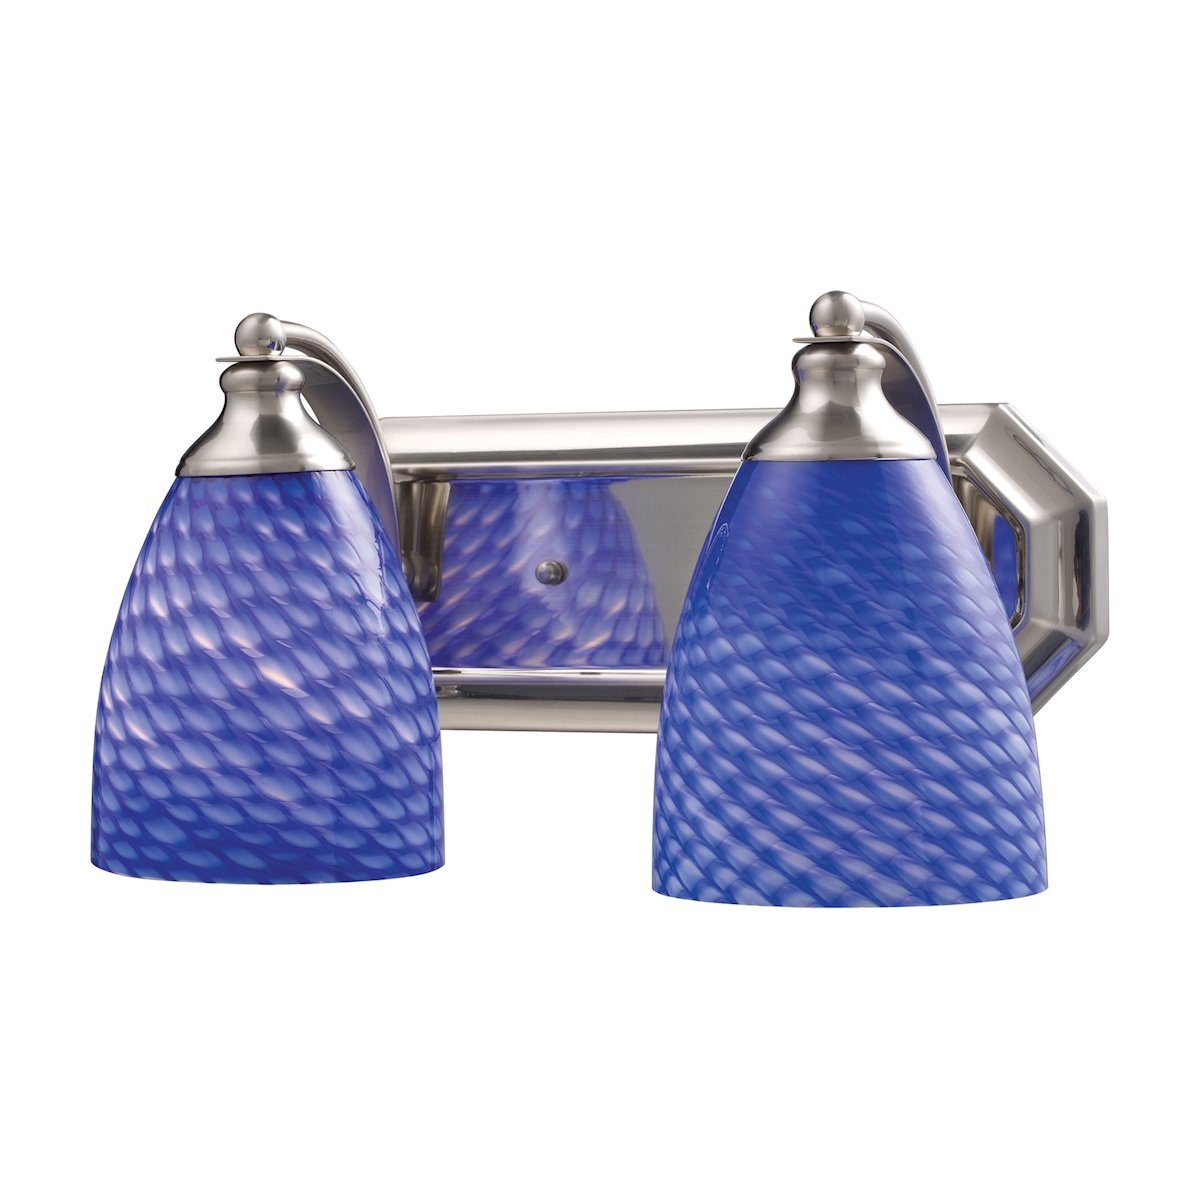 Bath And Spa 2 Light Vanity In Satin Nickel And Sapphire Glass Wall Elk Lighting 